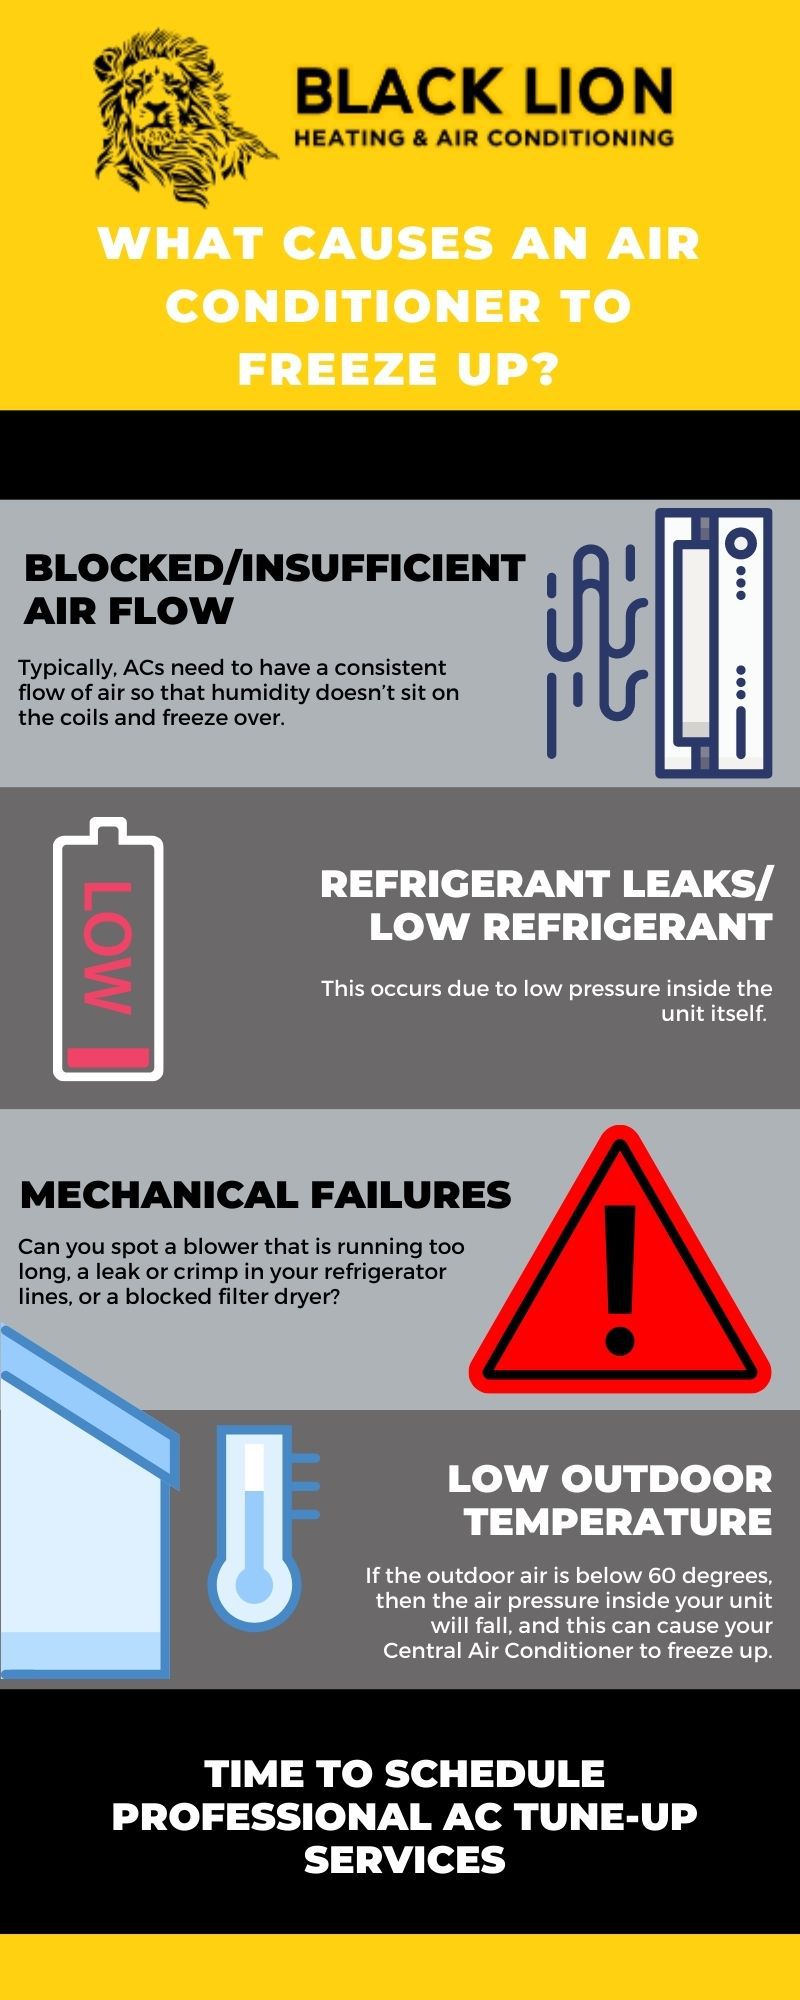 What Causes an air conditioner to freeze up